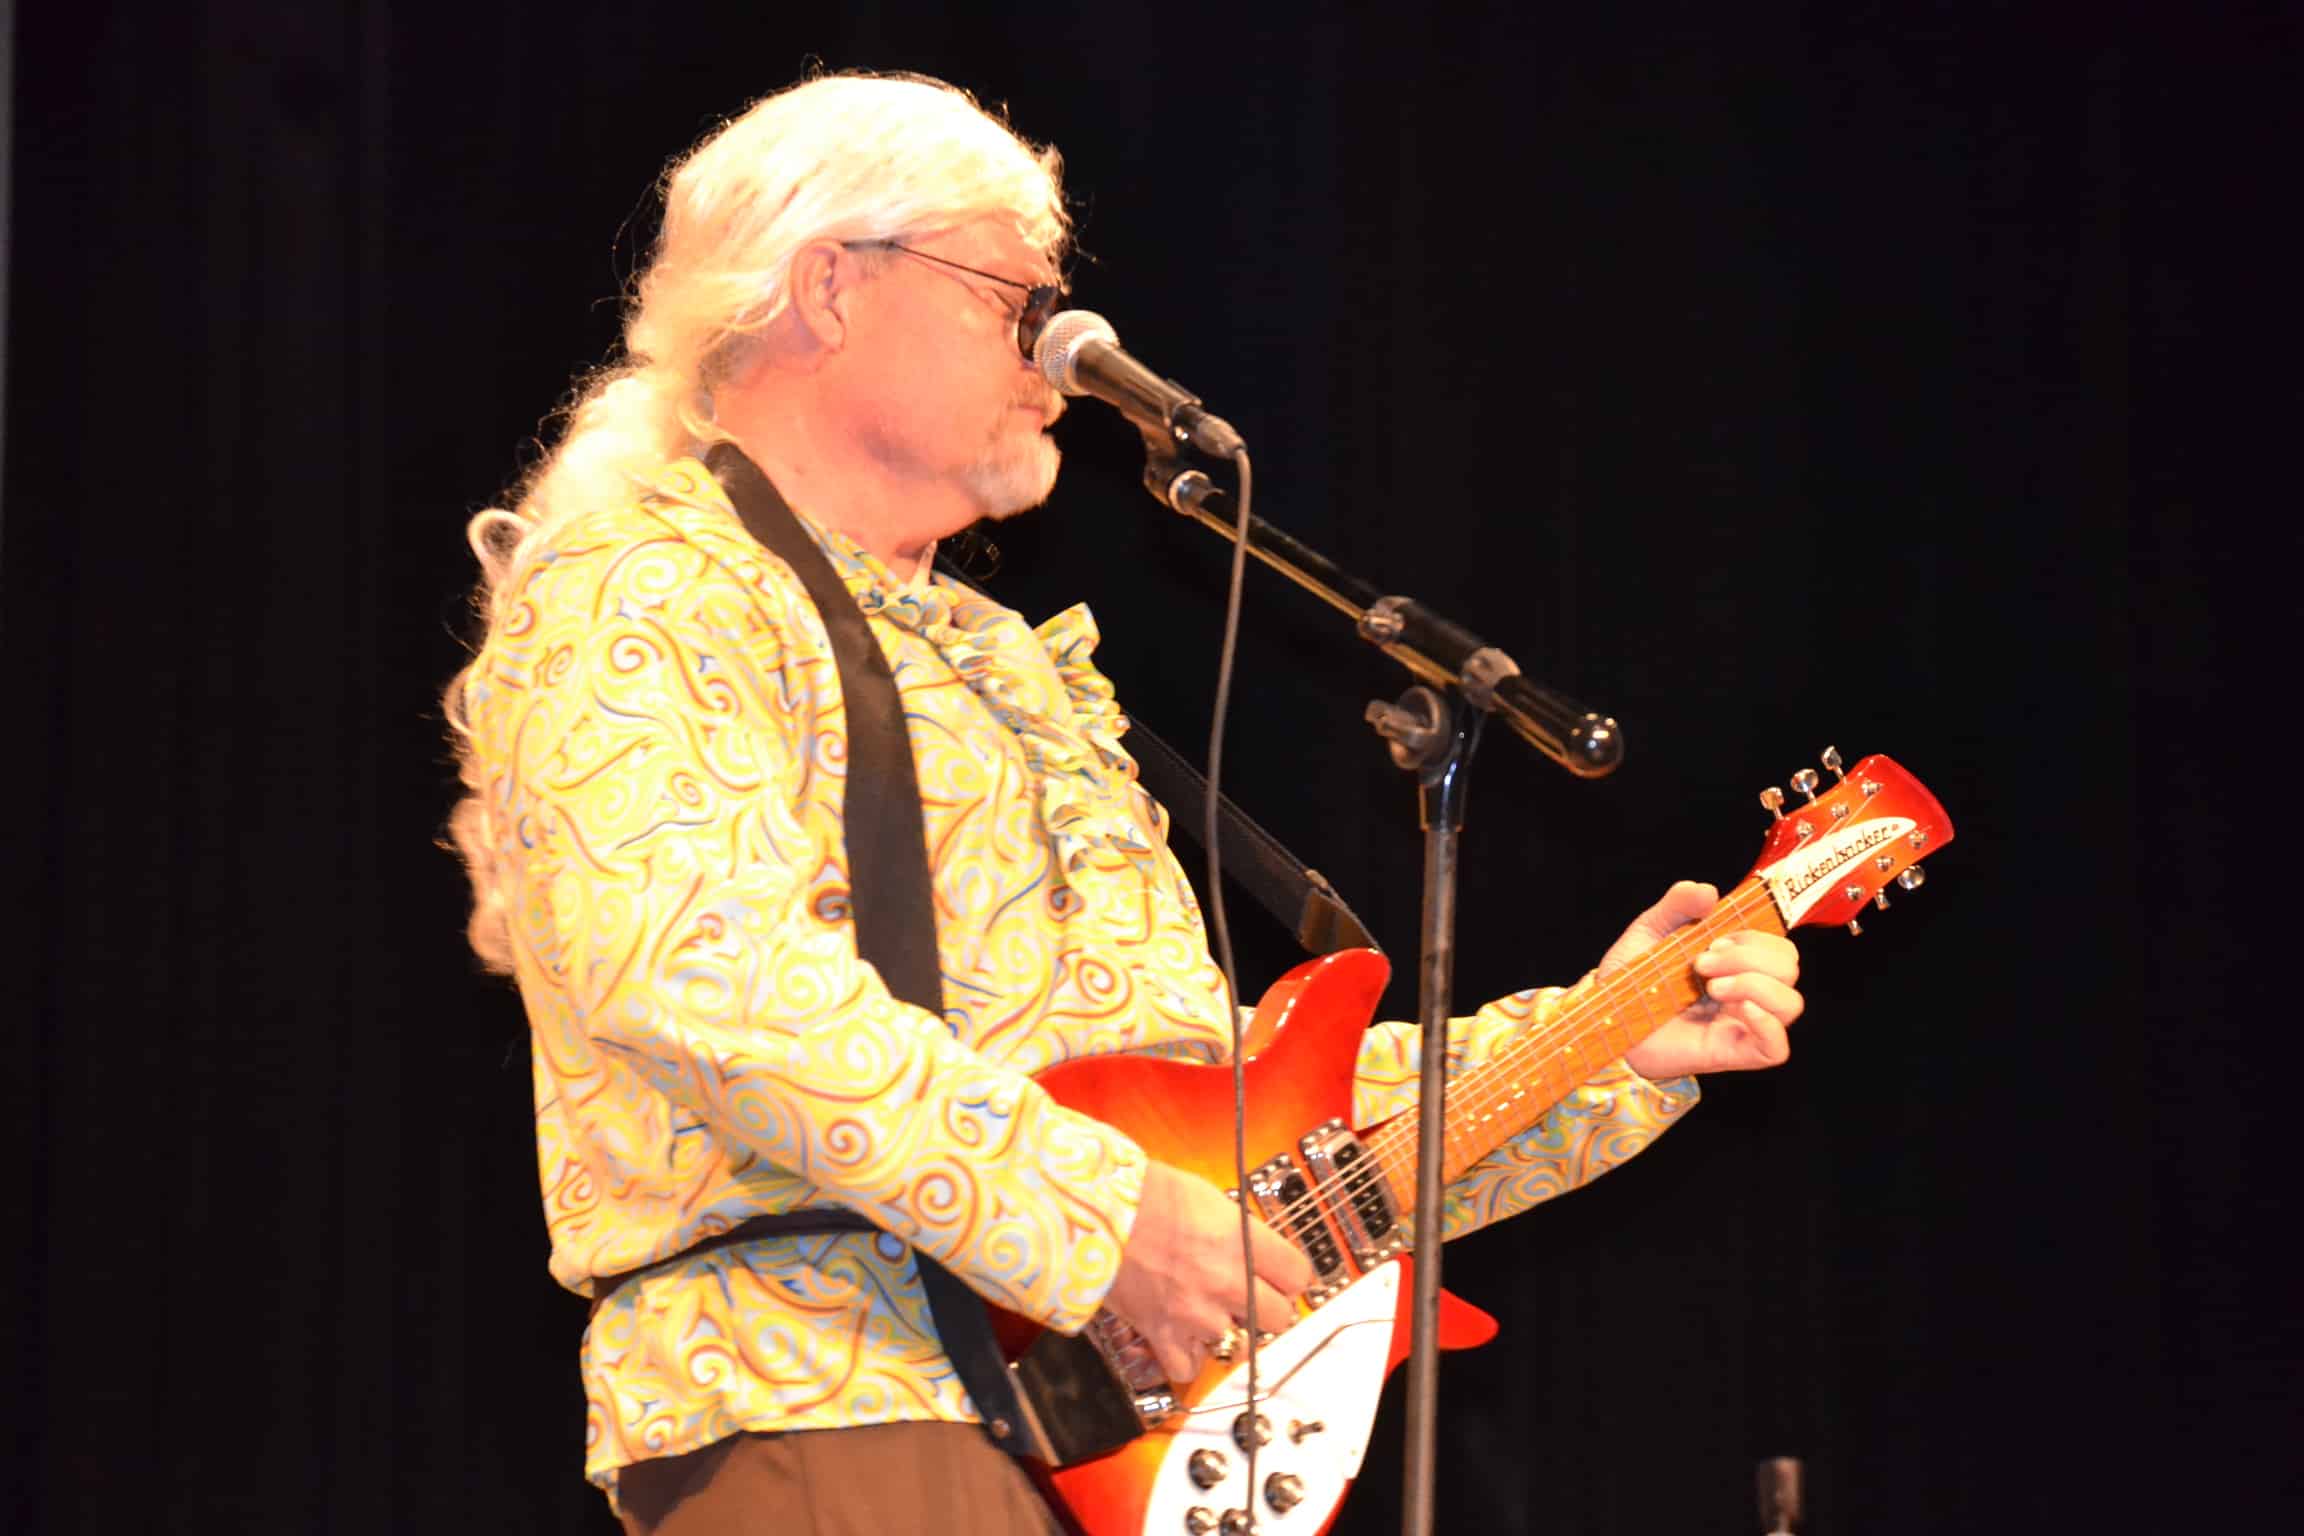  Tony Beam, along with three other faculty, took the stage and sang popular songs for the audience's enjoyment.&nbsp; 